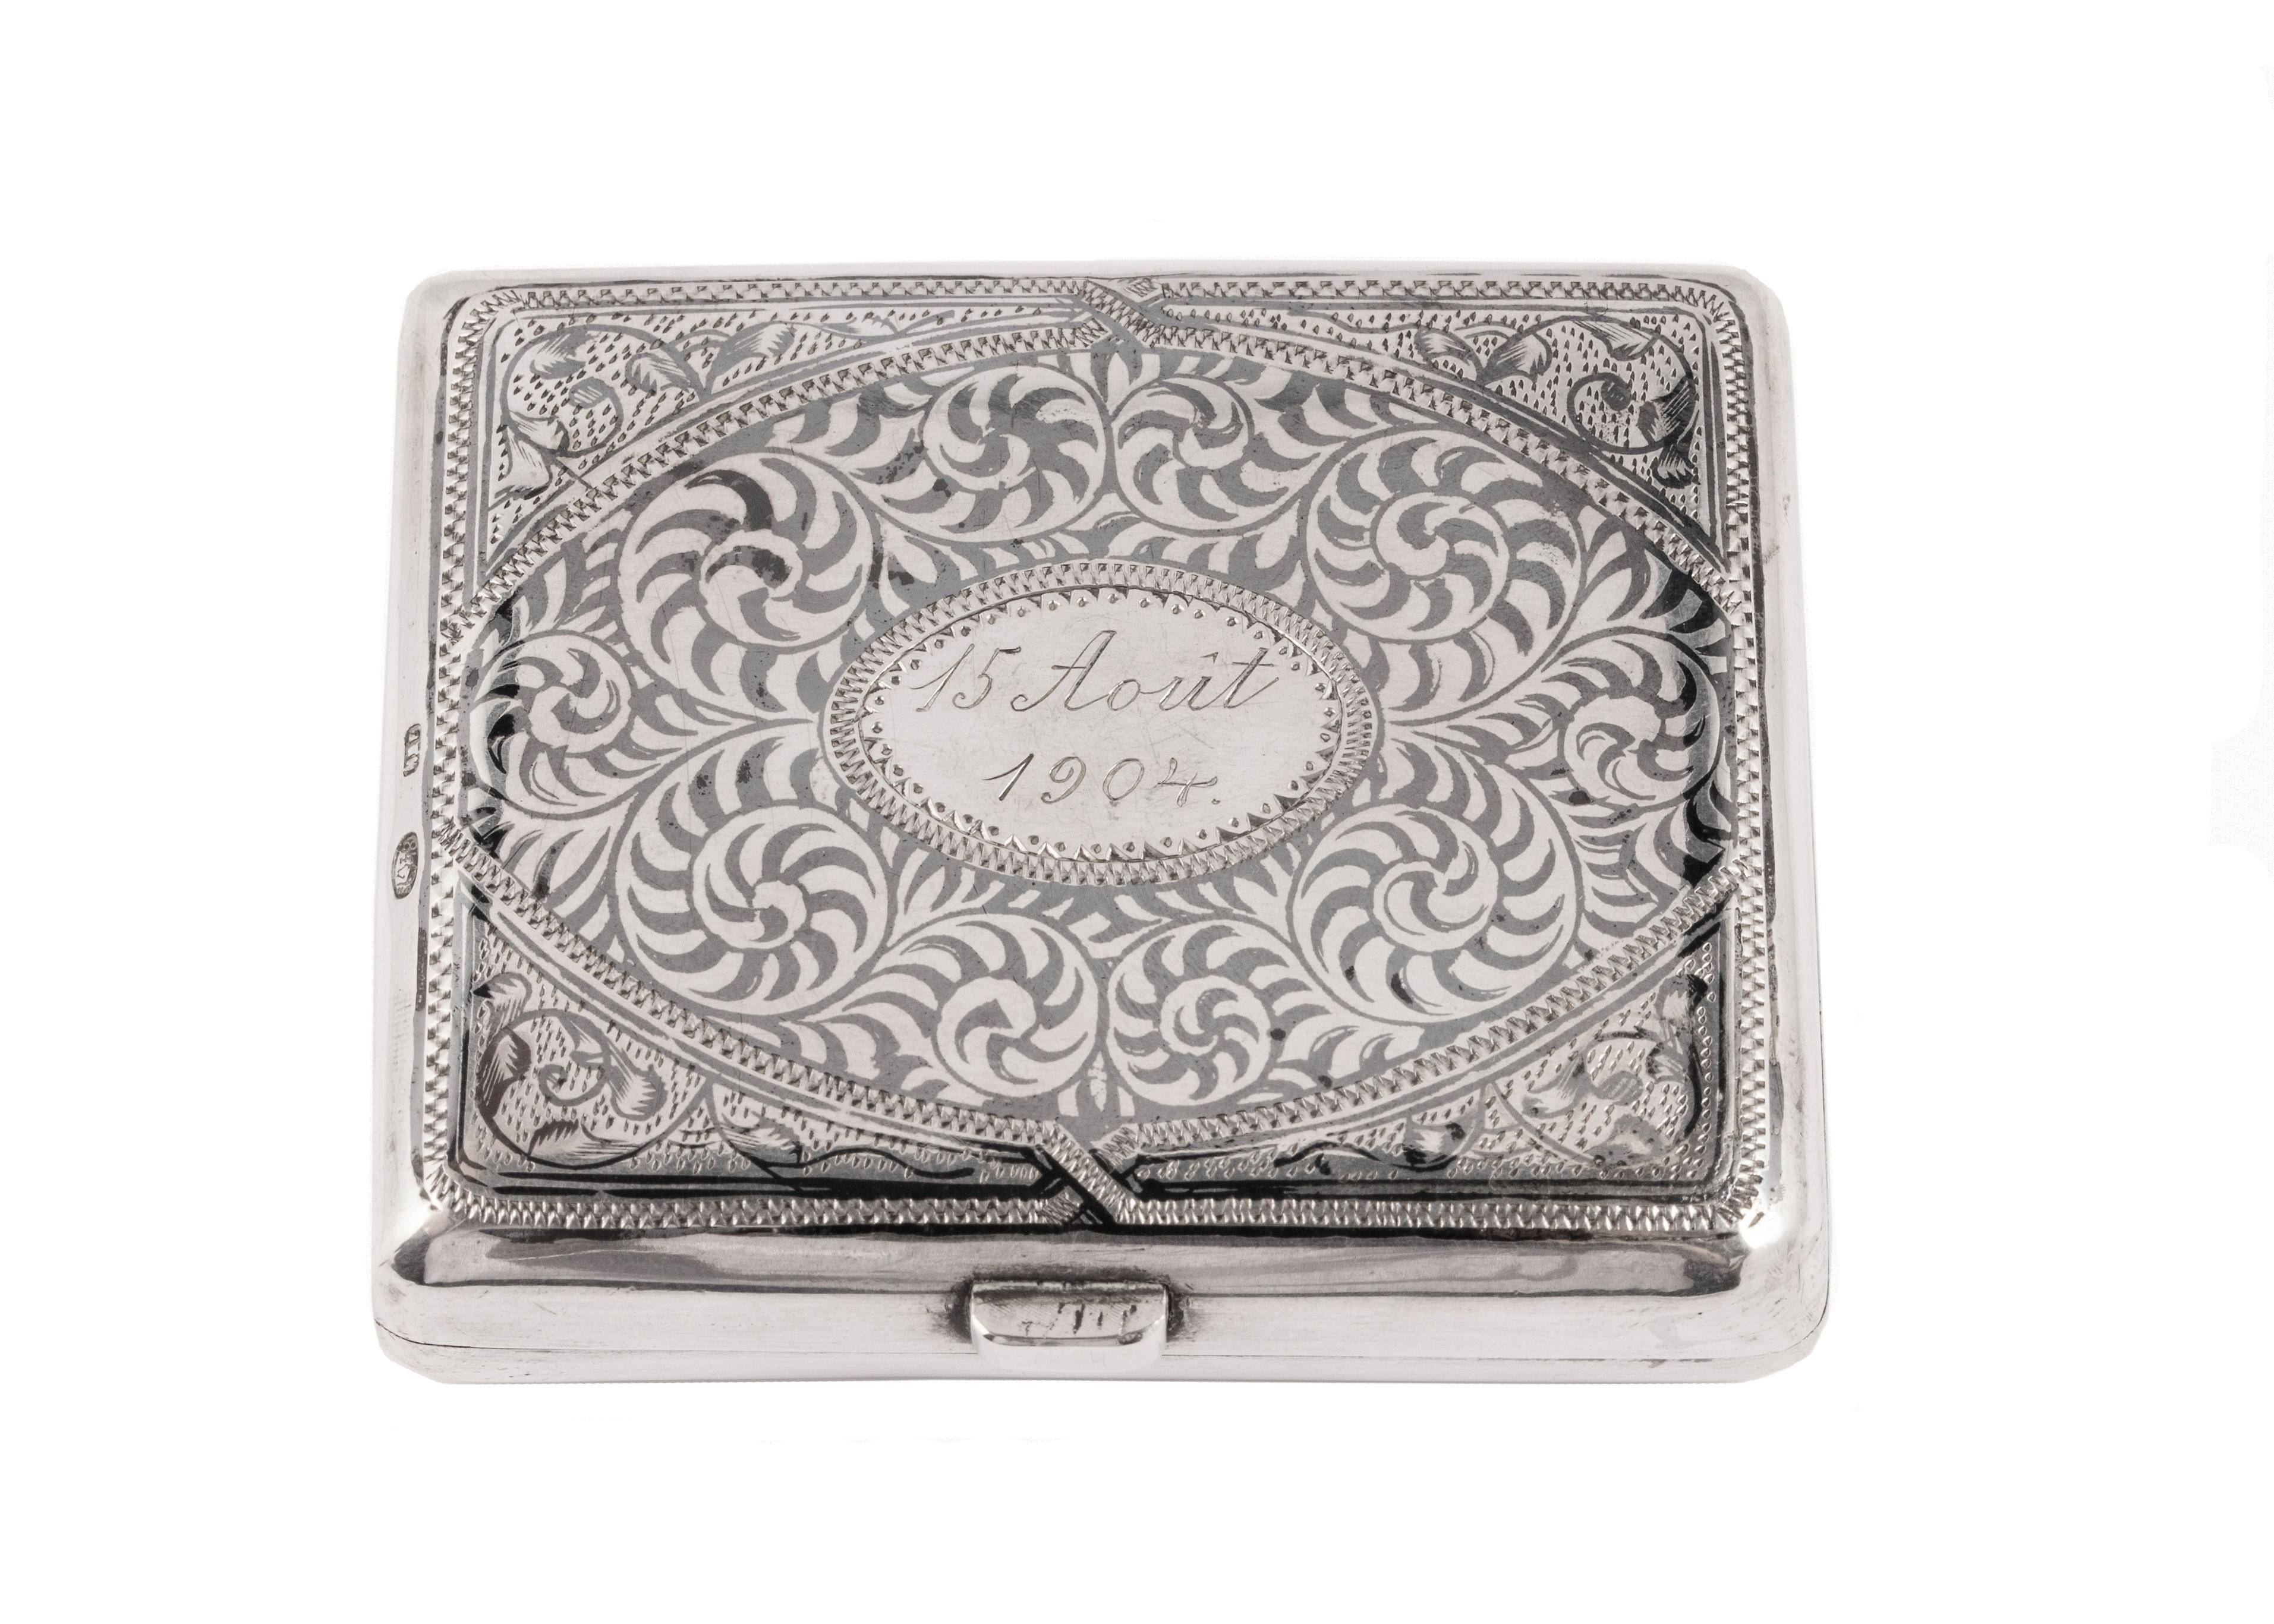 Russian nielloed silver box from the Romanov era, period of Tsar Nicholas II, with rounded corners, overall nielloed with scrolling foliage, displaying a central scene of a Moscow cityscape, the reverse with further scrolling decoration in niello.